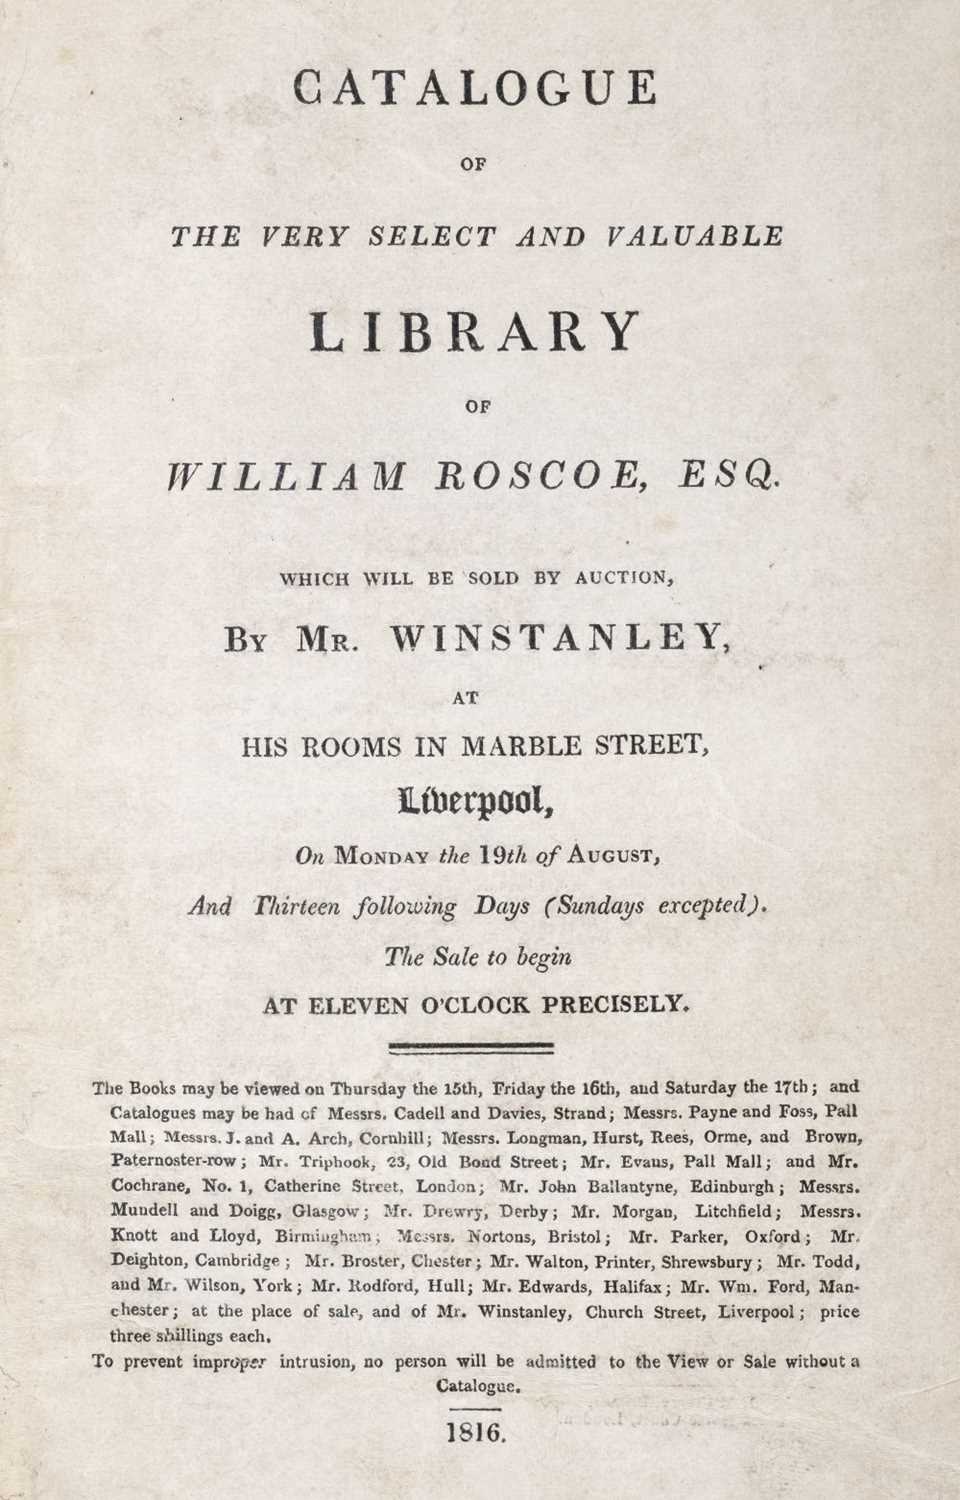 Lot 252 - Roscoe (William, 1753-1831). Catalogue of the ... library of William Roscoe, 1816